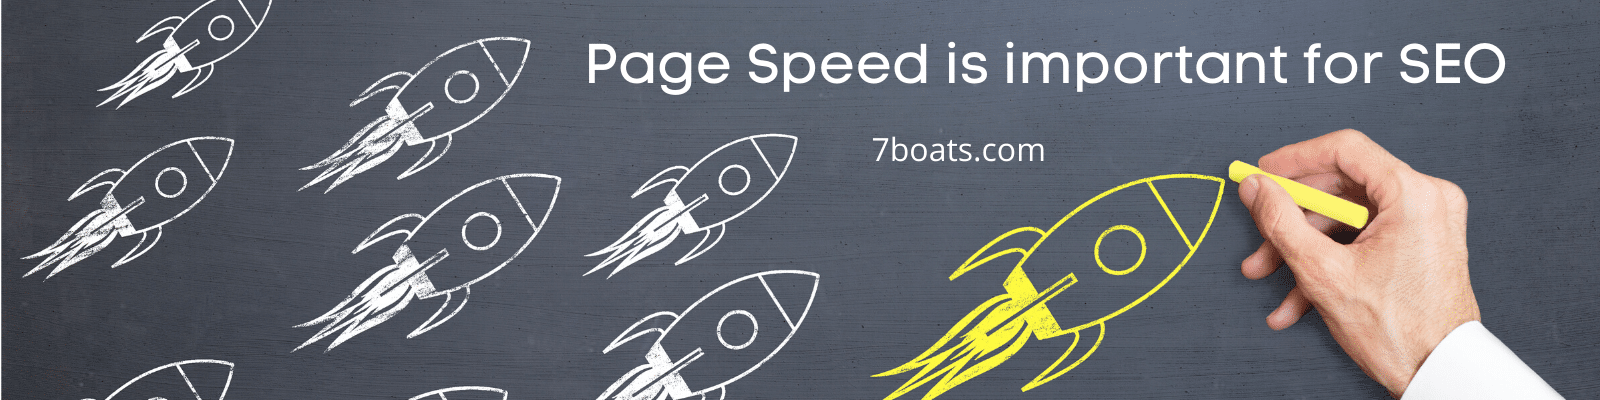 Page speed and SEO ranking